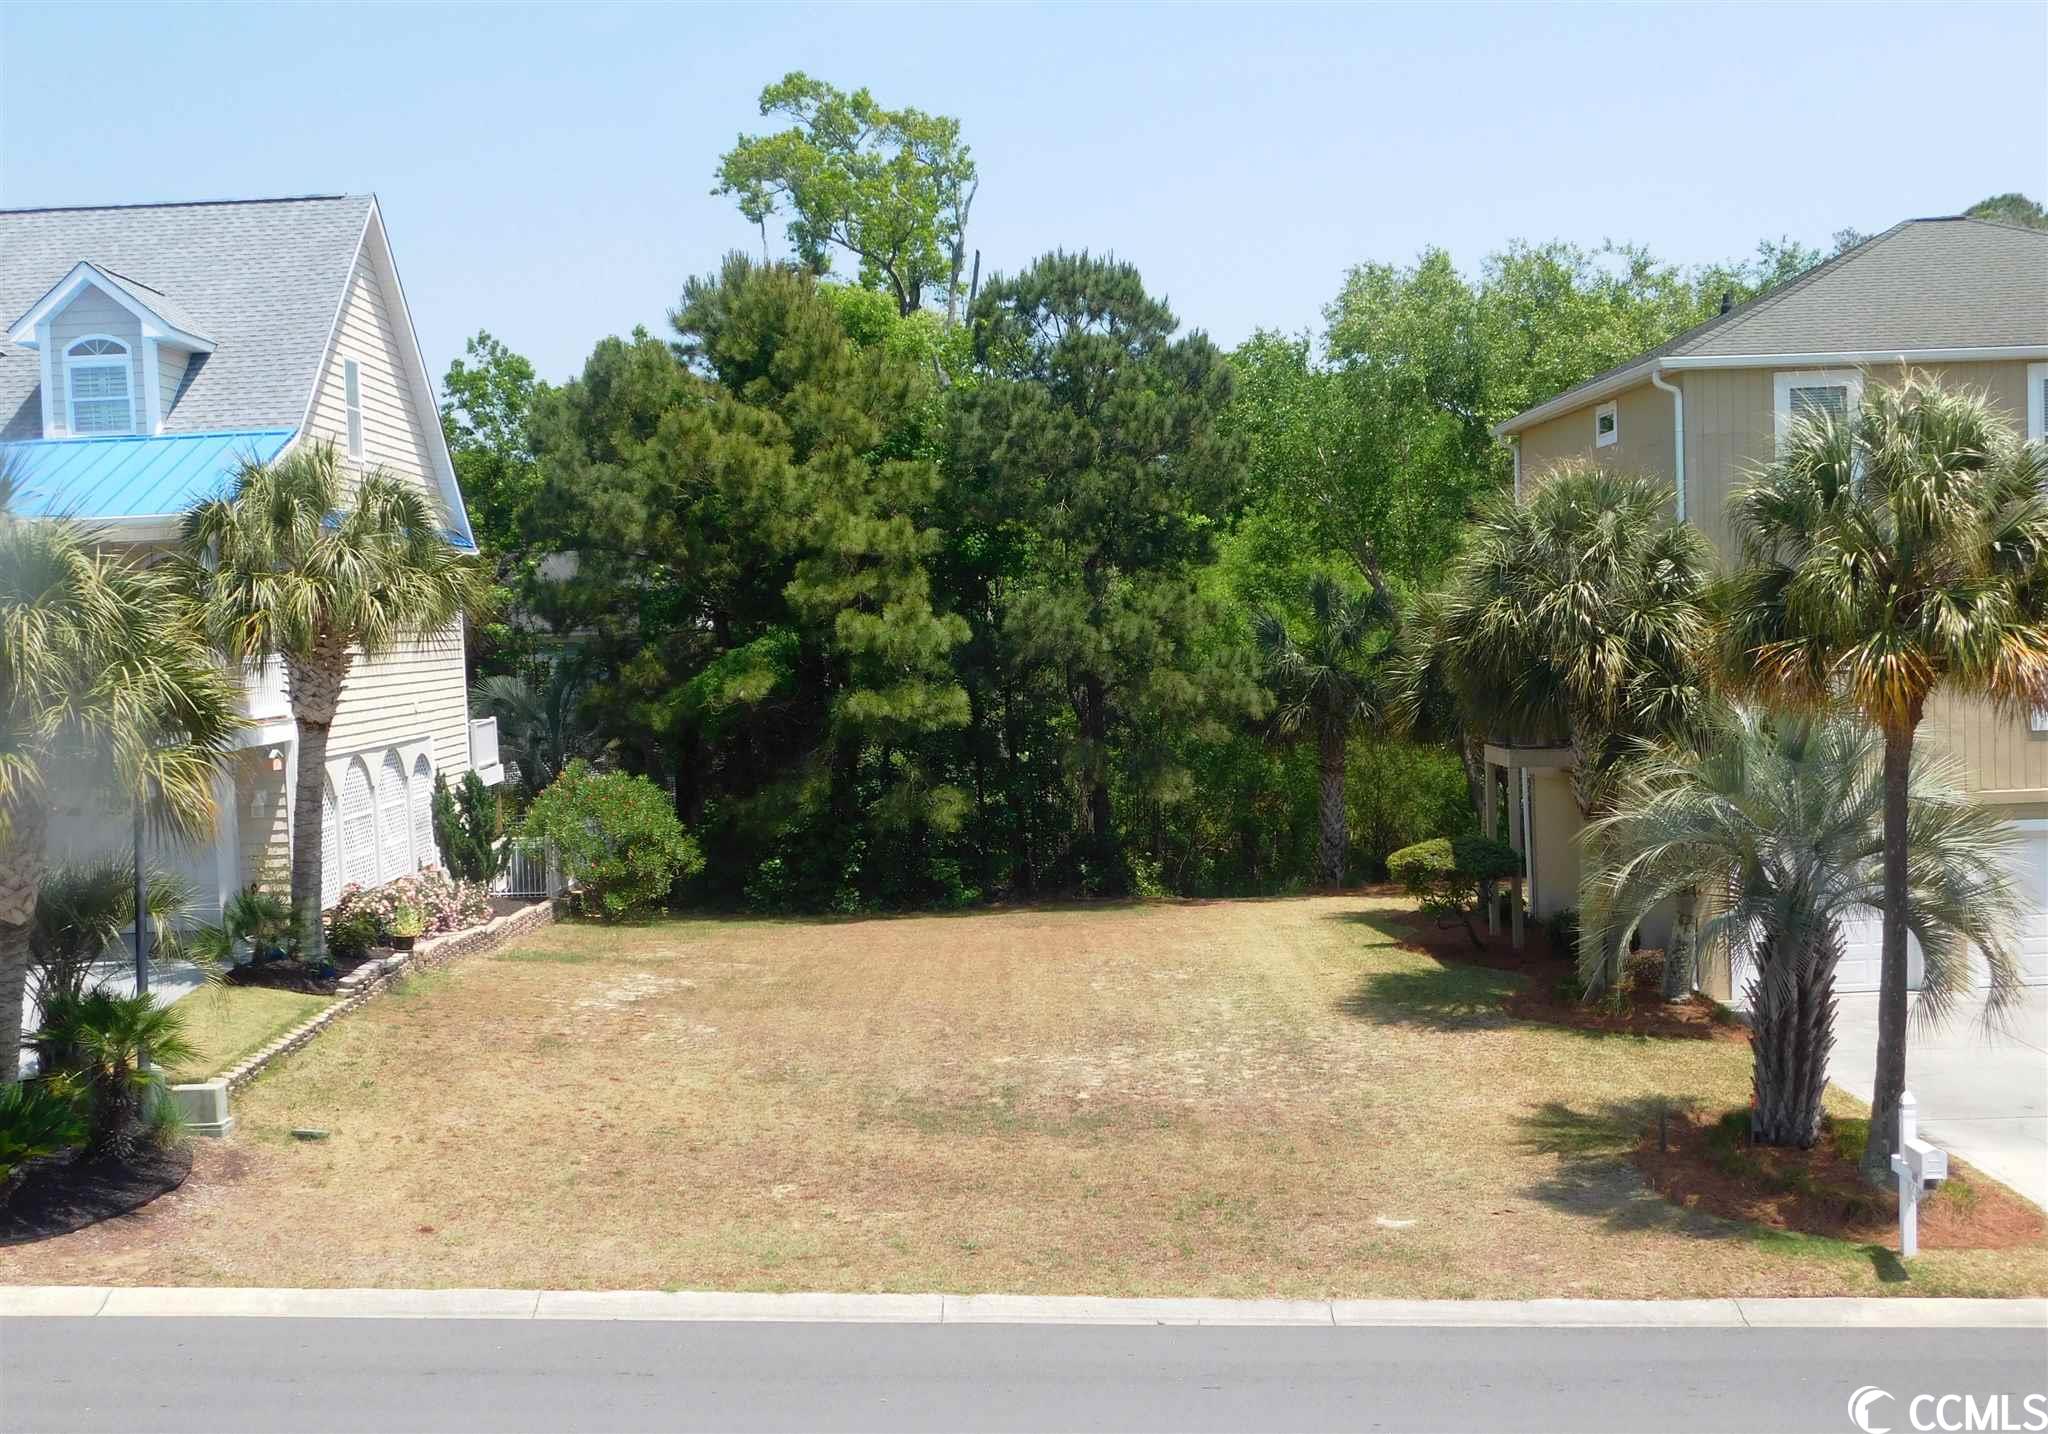 410 5th Ave. S North Myrtle Beach, SC 29582